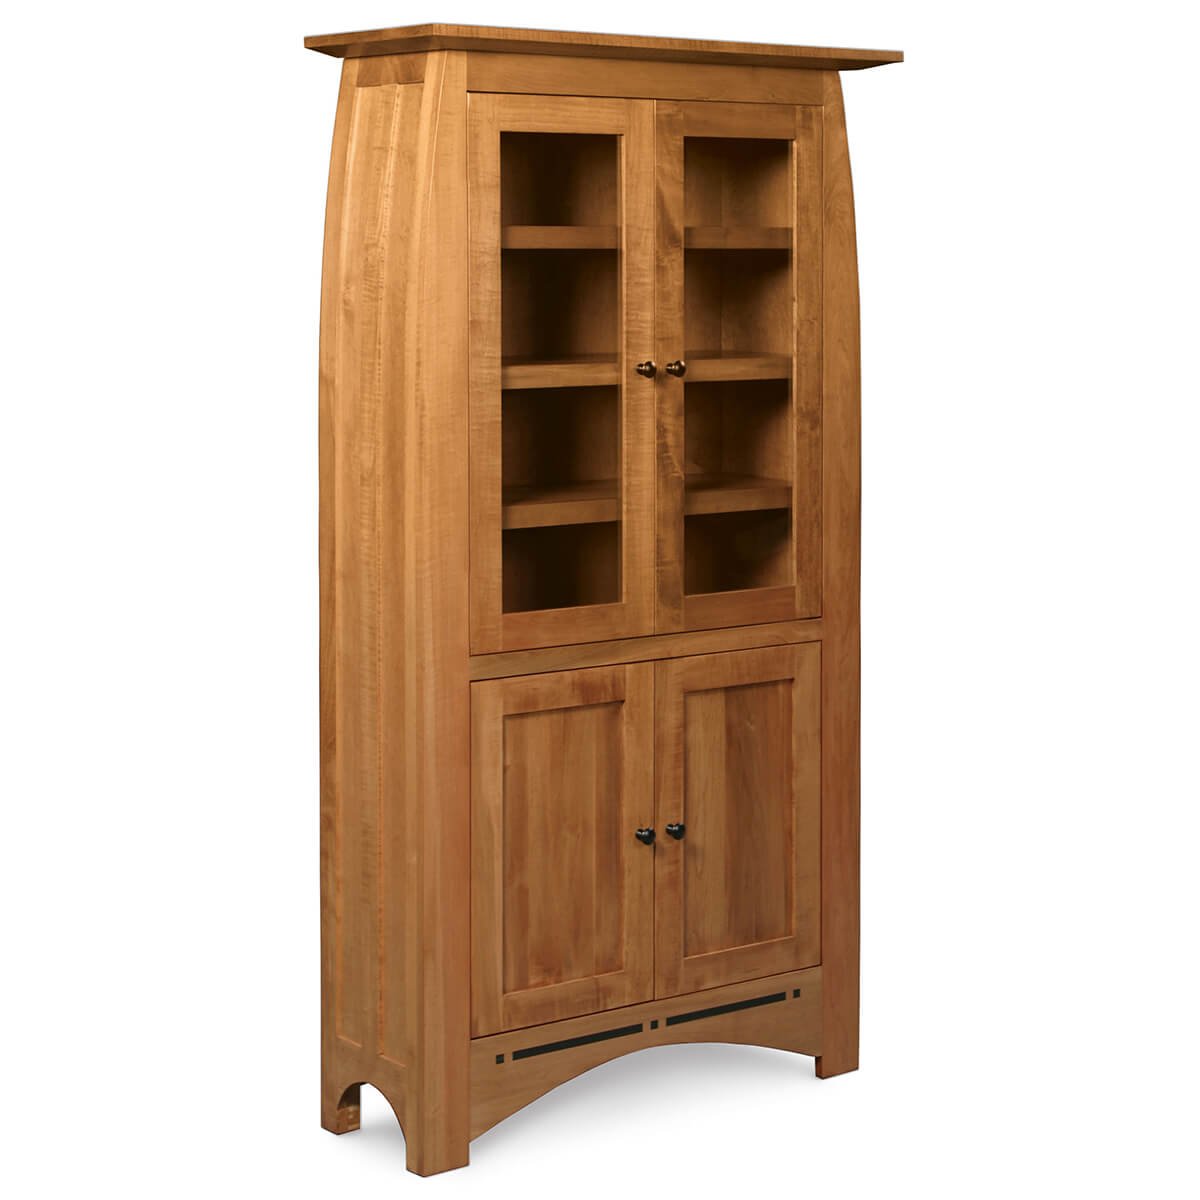 Read more about the article Aspen Tall Bookcase with Glass Doors on Top, Wood Doors on Bottom and Inlay